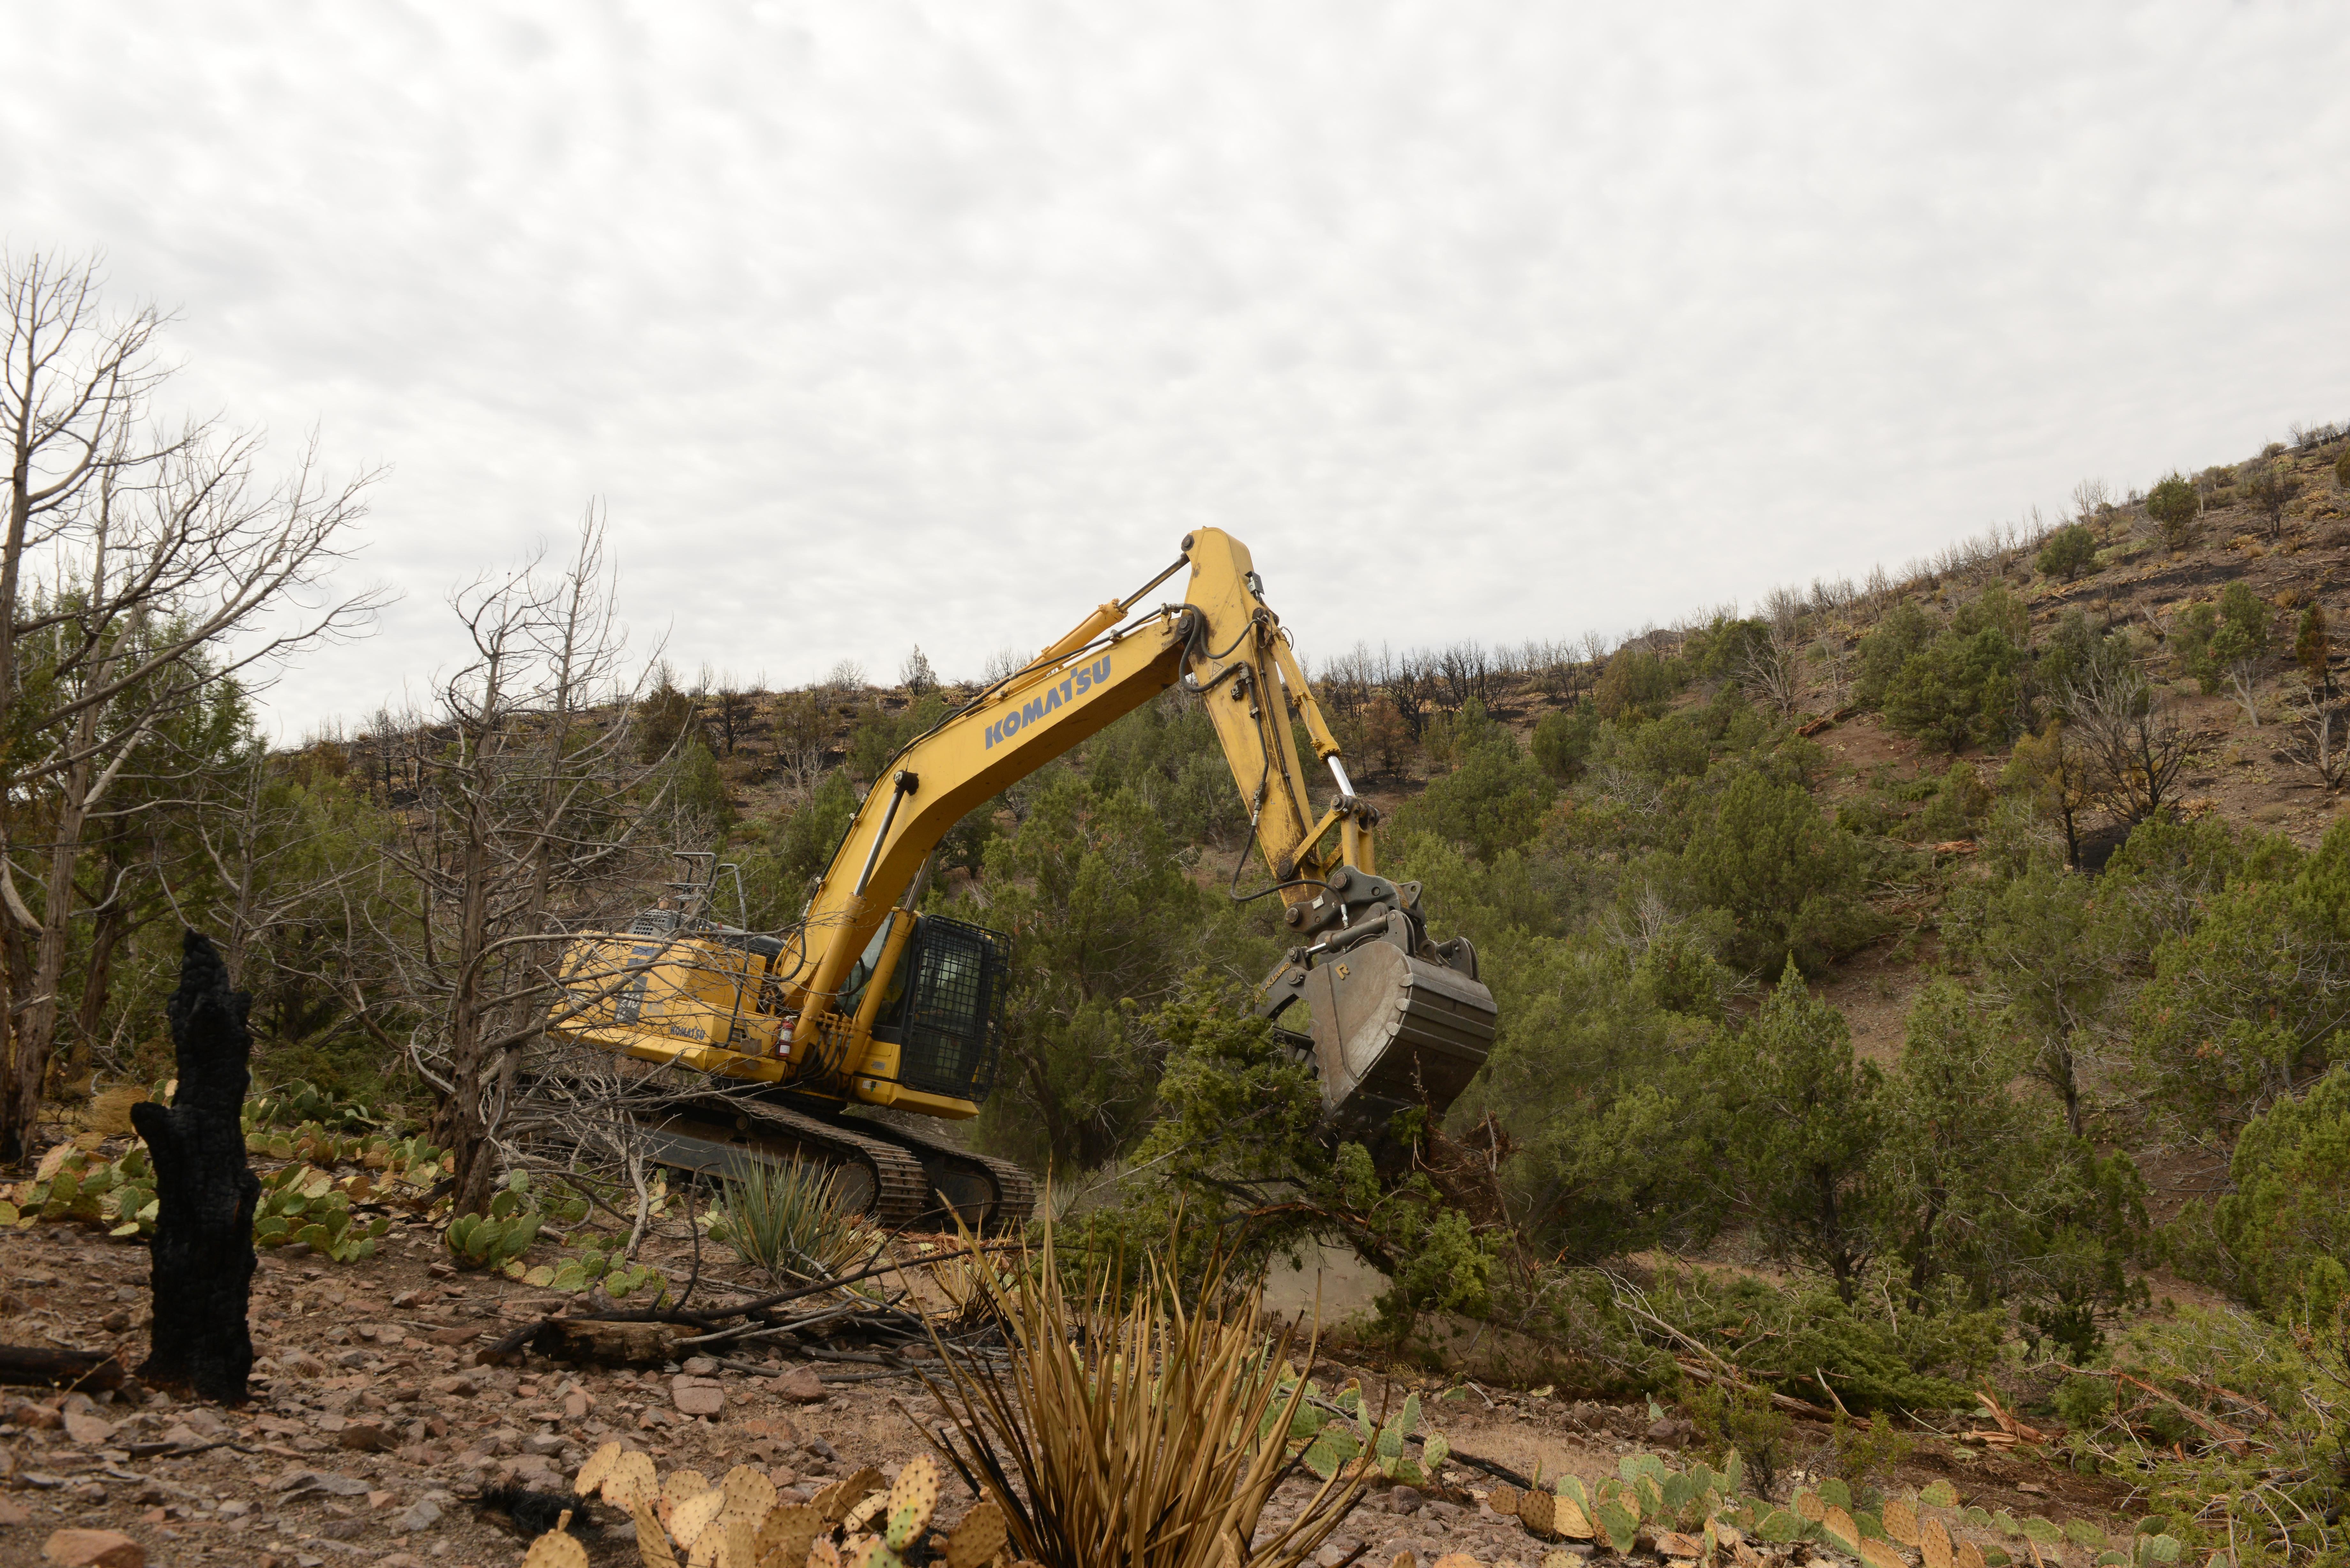 The heavy equipment boss (left) and the resource advisor (right) keep an eye out July 29, 2022, while the excavator operator works on rehabilitating the dozer line.  The line was put in as a fuel break, and restoring it helps protect the area from erosion